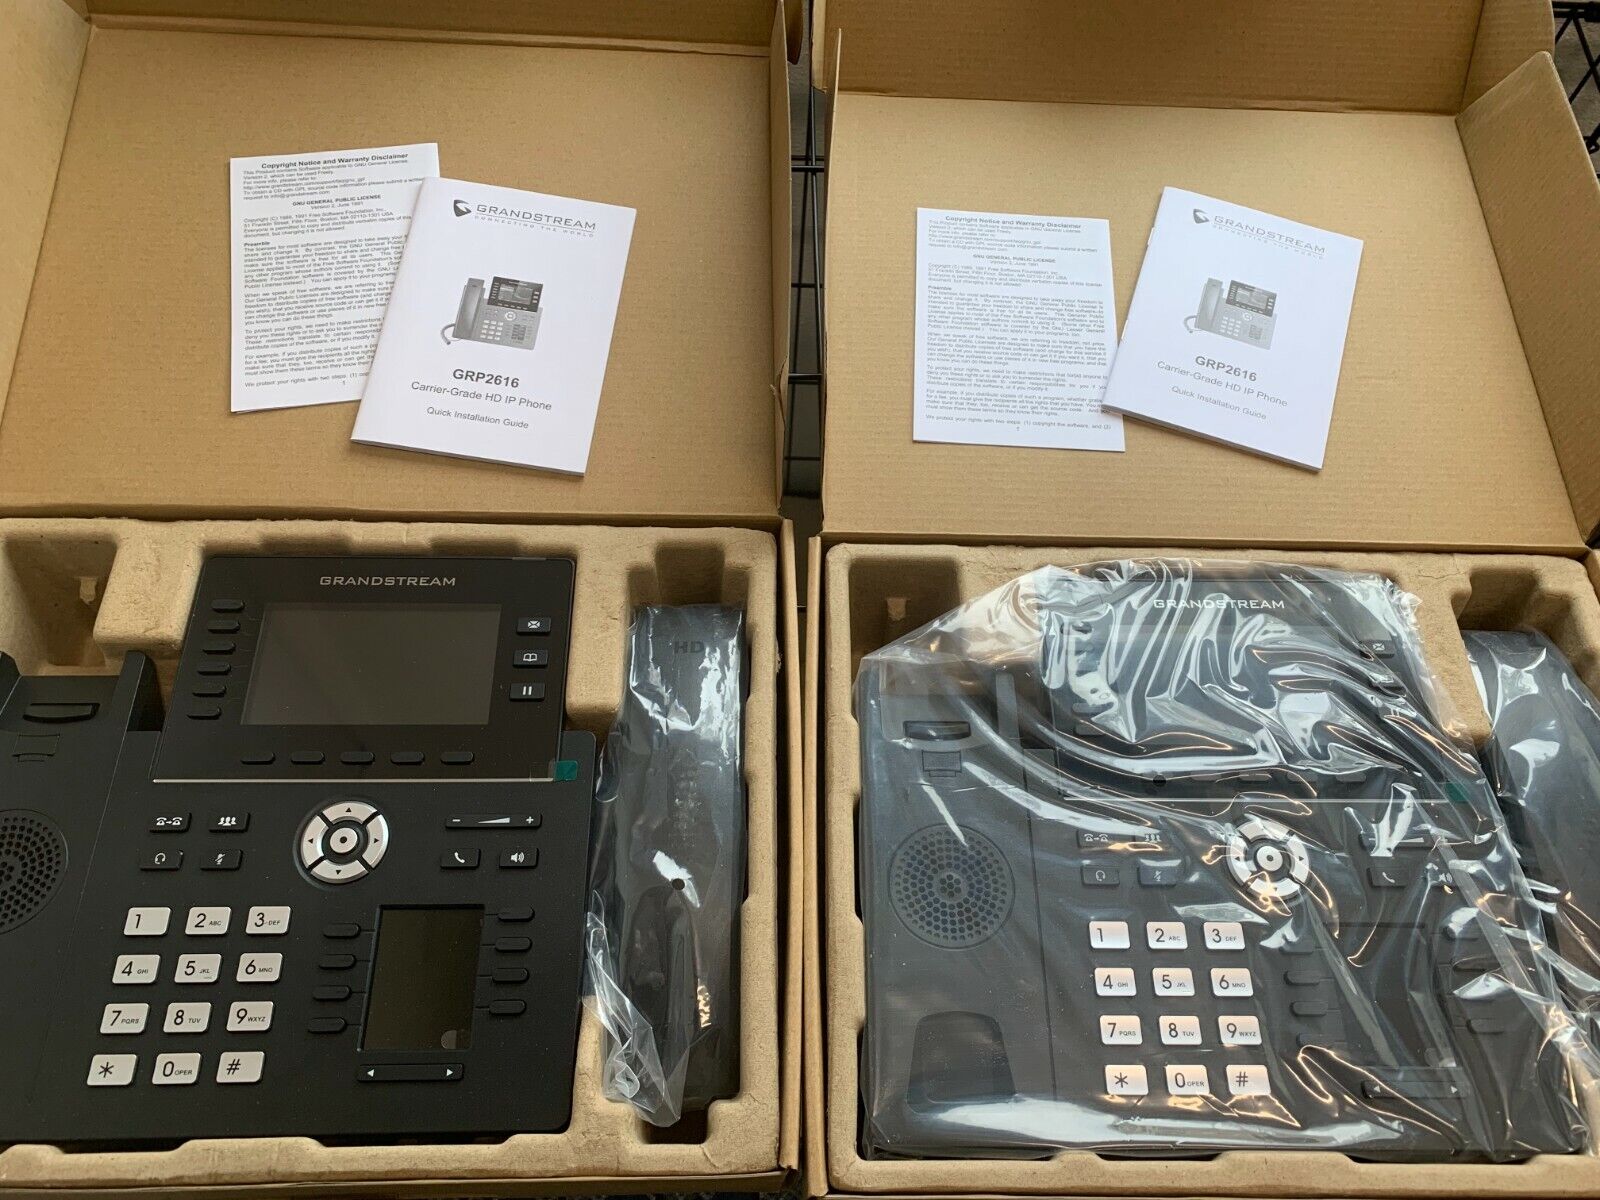 2x NEW Grandstream GRP2616 Carrier-Grade IP Phone for Business